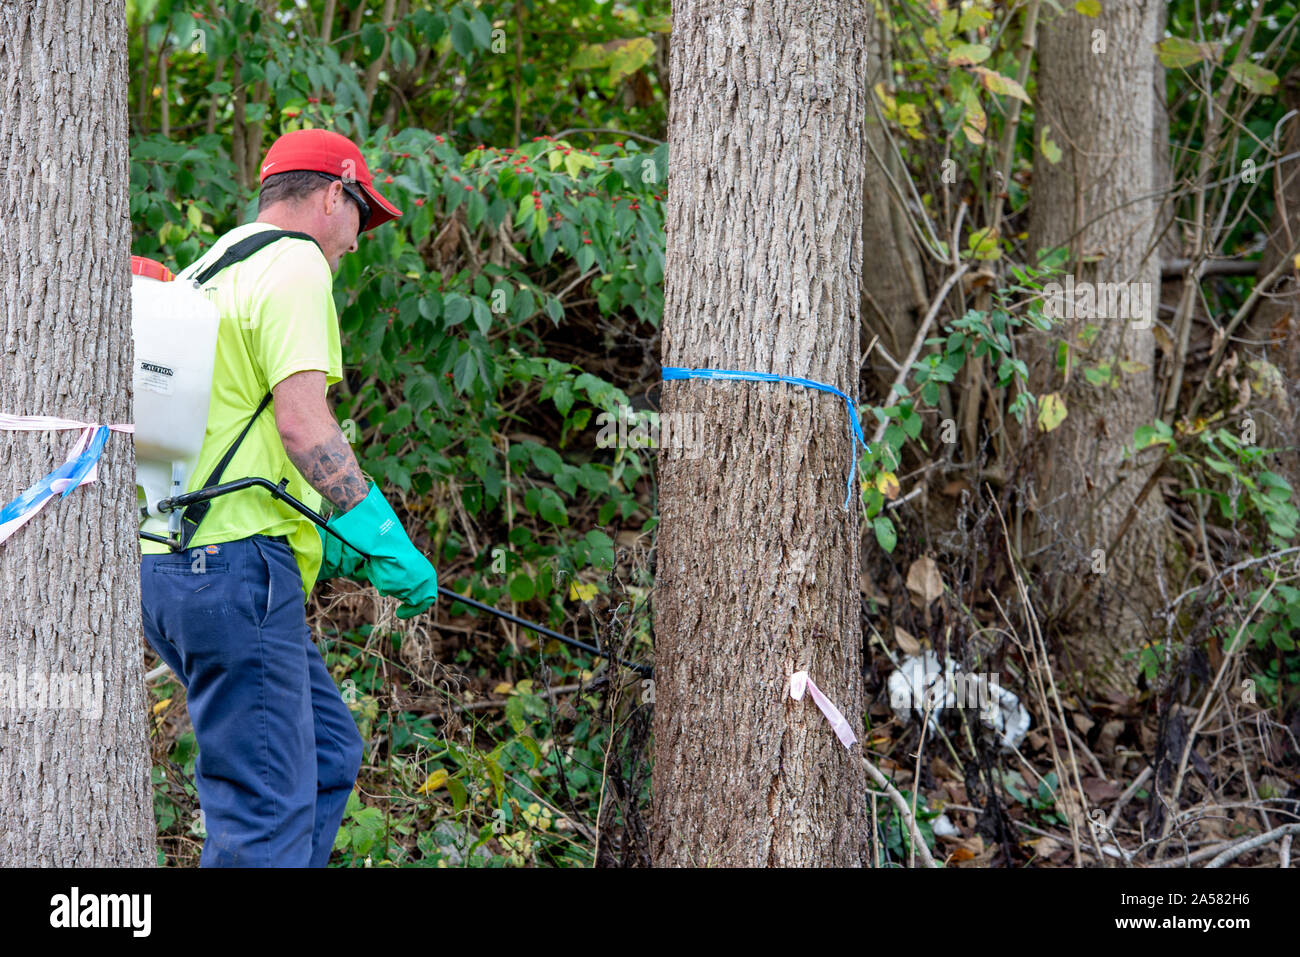 ARBORIST SPRAYING SYSTEMIC INSECTICIDE DINOTEFURAN BARK SPRAY TREATMENT TO TRUNK OF A BLACK WALNUT TREE TO PROTECT FROM SPOTTED LANTERNFLY INFESTATION Stock Photo